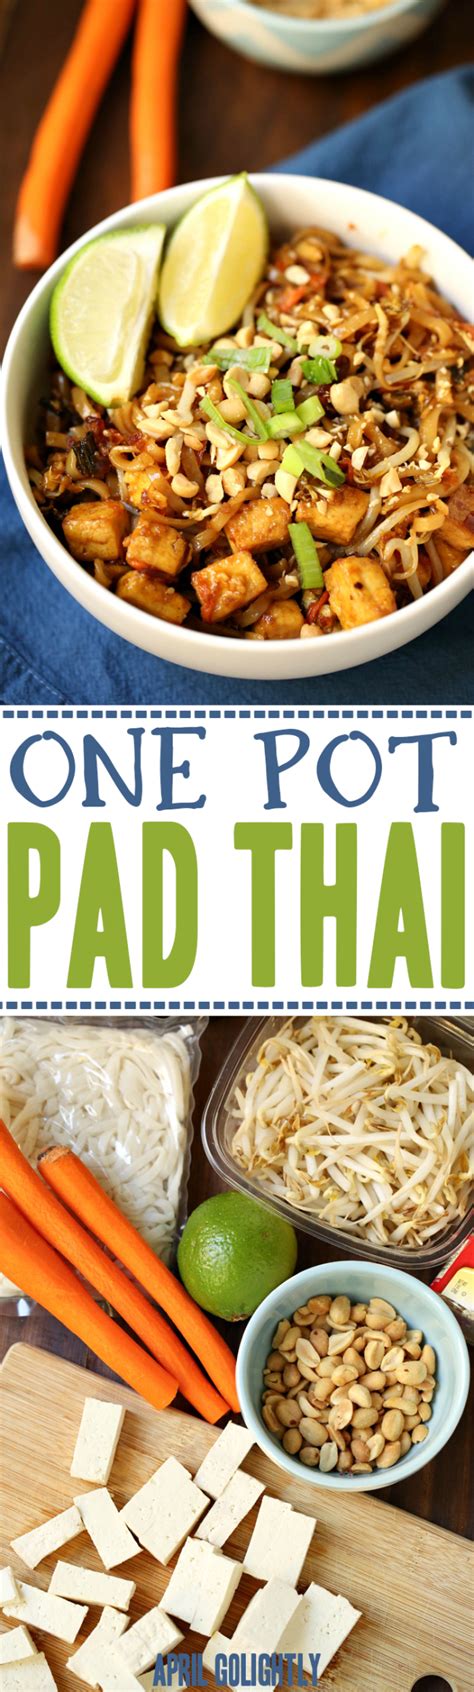 Easy One Pot Pad Thai Recipe to make quickly for dinner ...